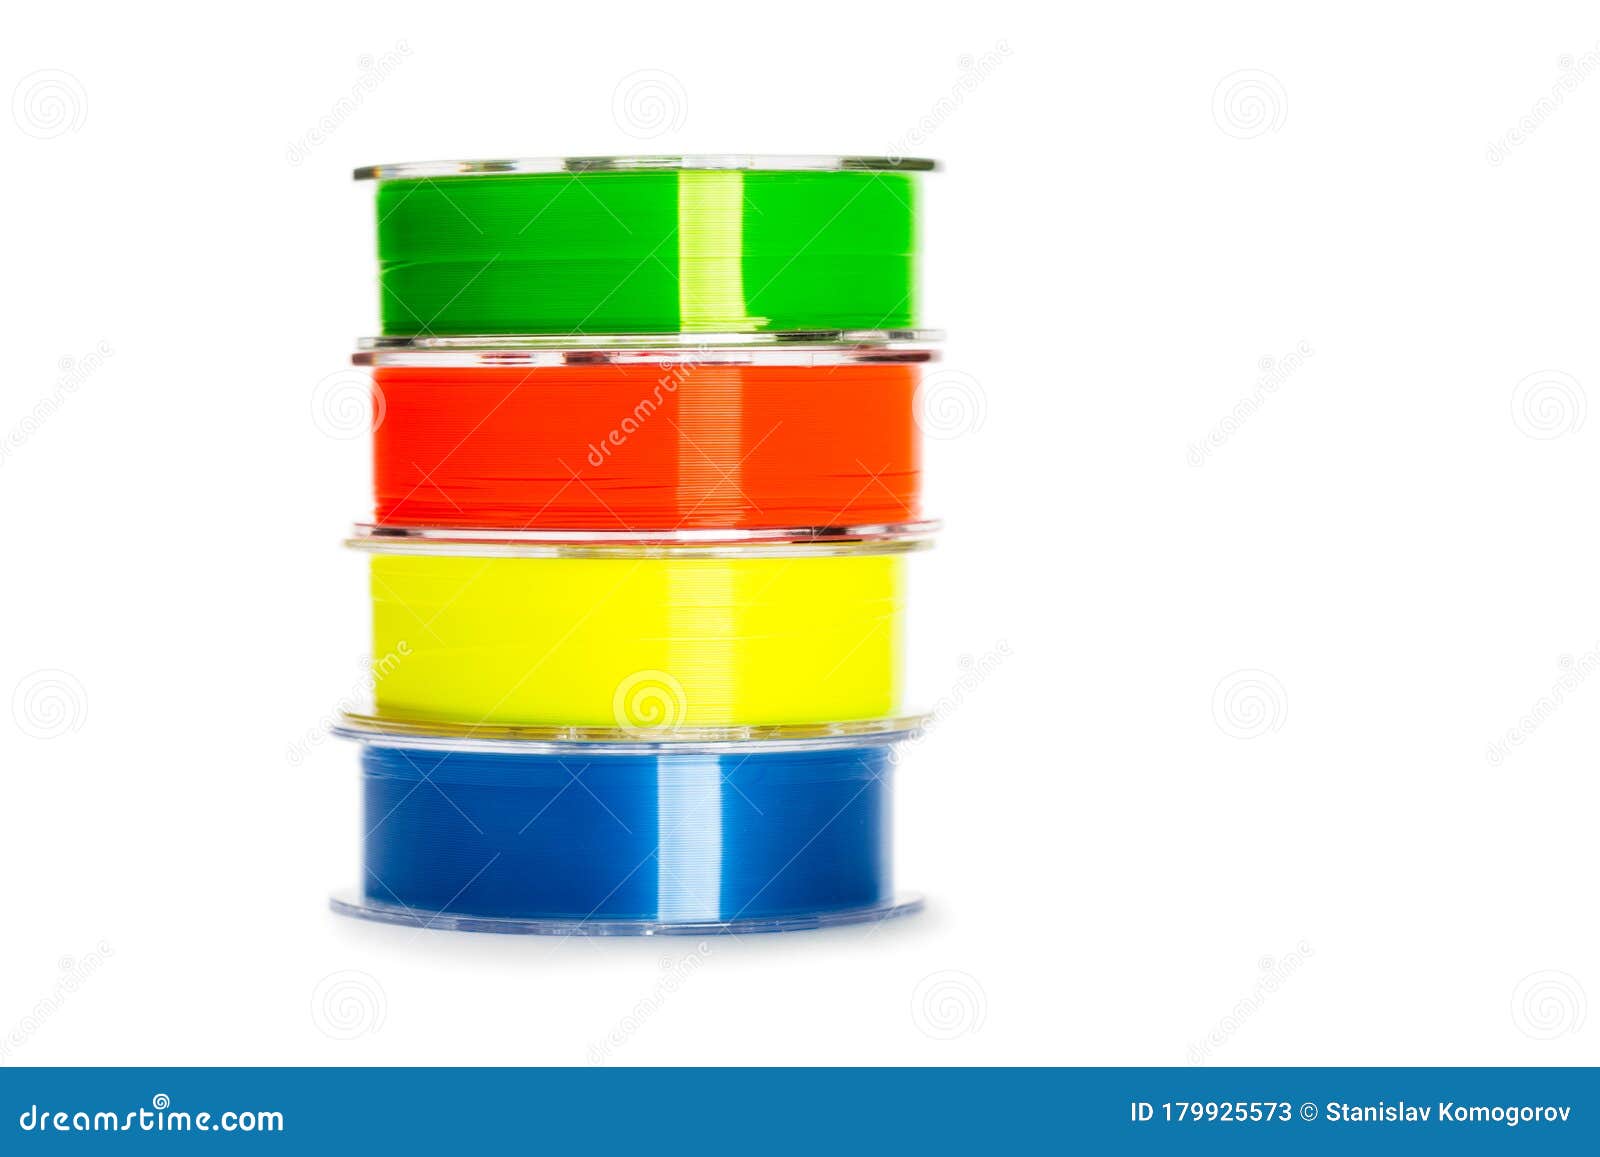 Colored Monofilament Fishing Line Stock Image - Image of object